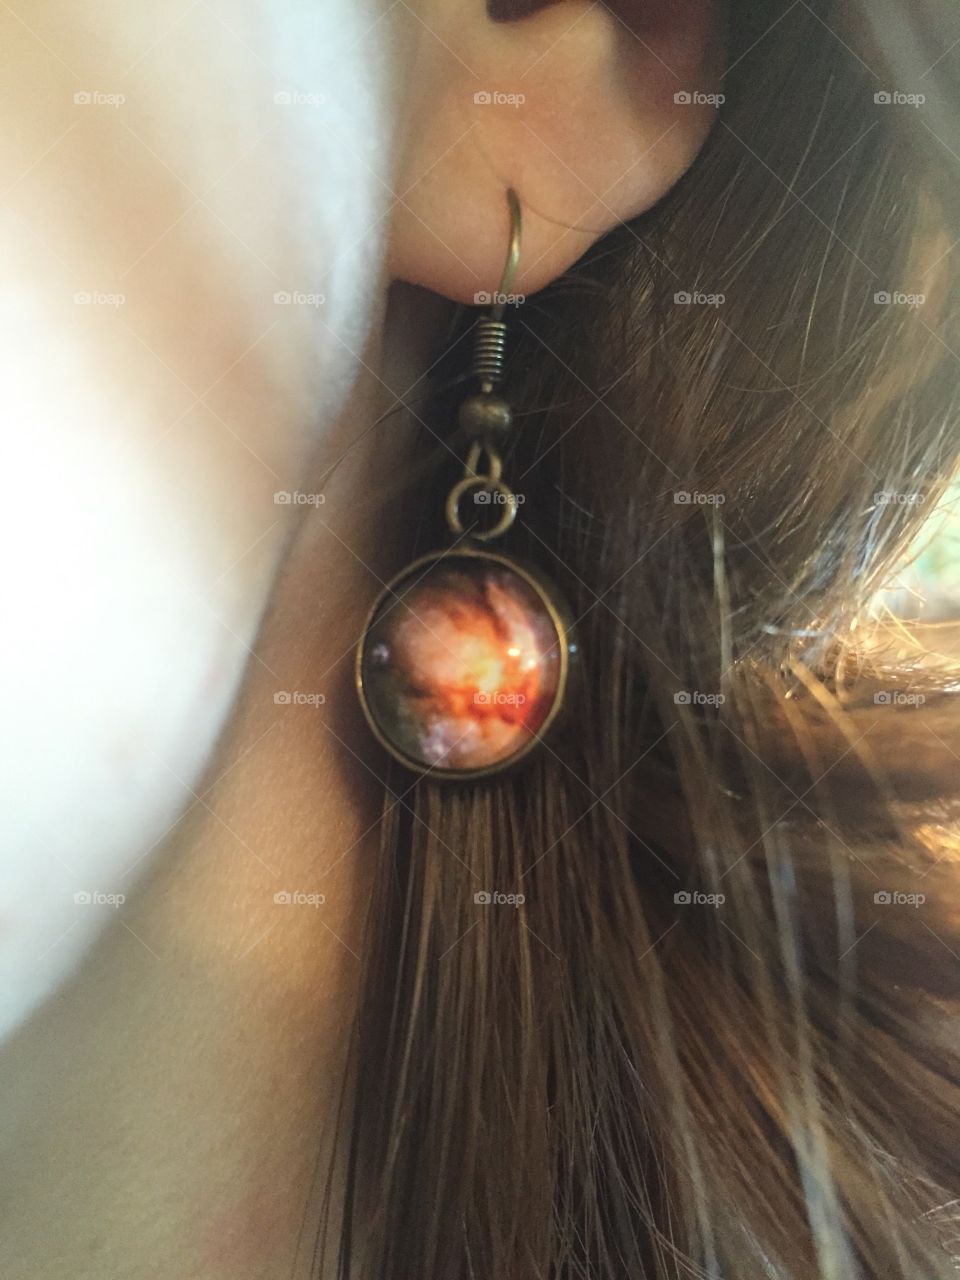 Space Earring. A photo of me wearing some lovely galaxy earrings.